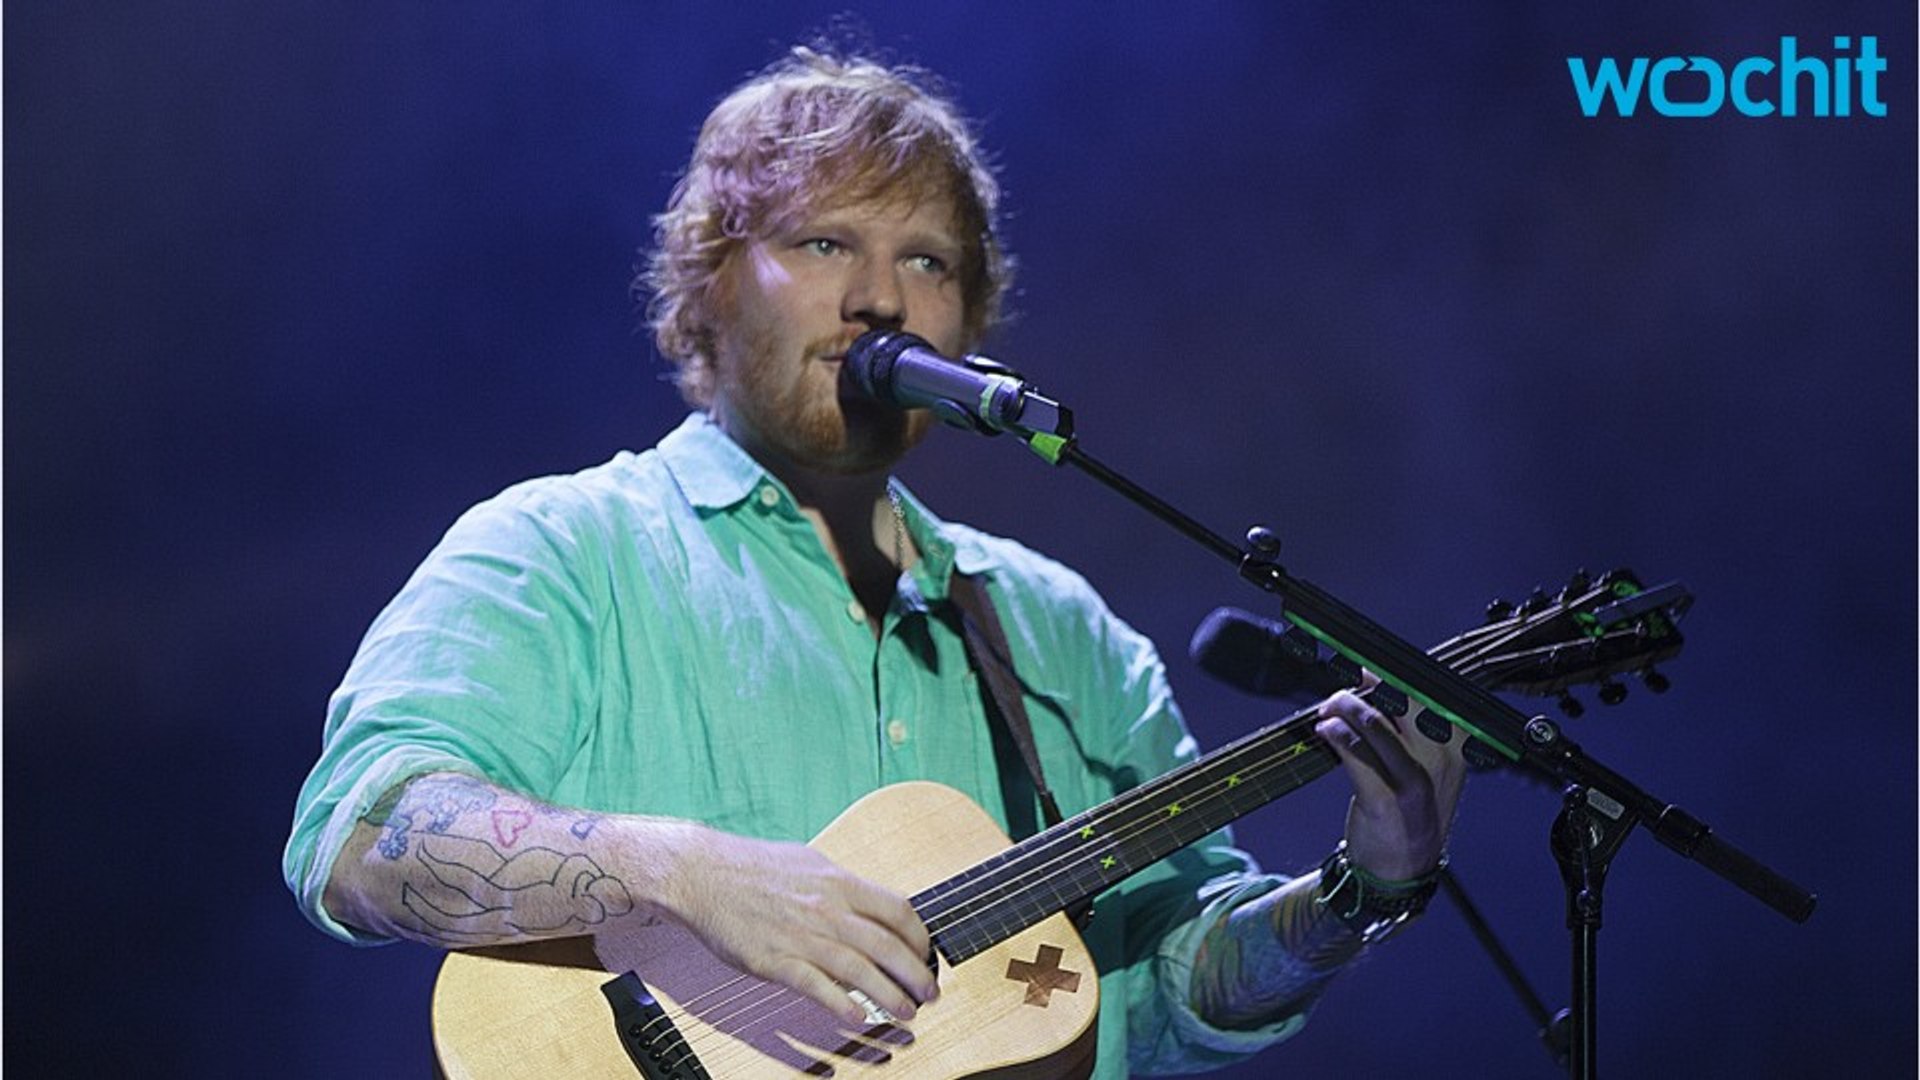 Ed Sheeran Shares The Unconventional Way He Lost Weight